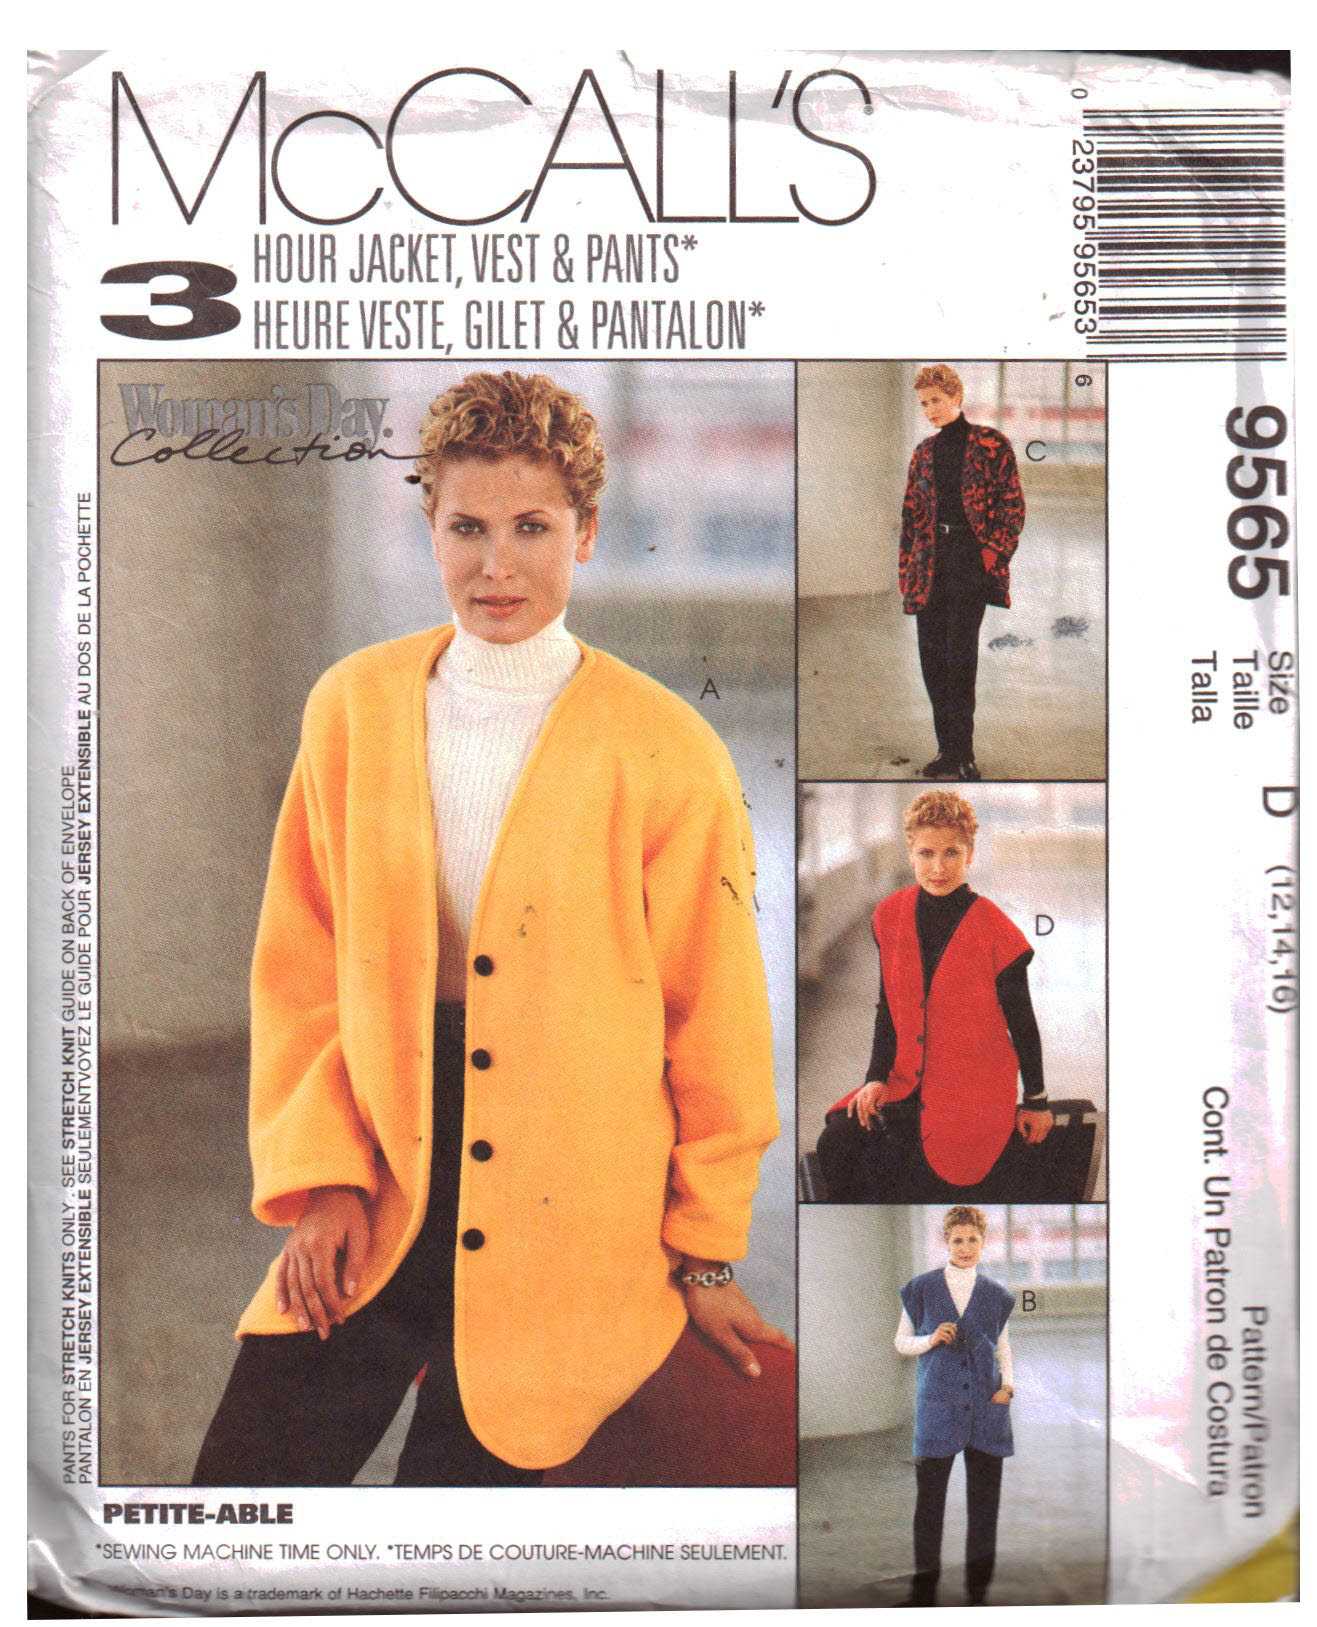 McCall's 9565 Jacket, Vest, Pants Size: D 12-14-16 Used Sewing Pattern